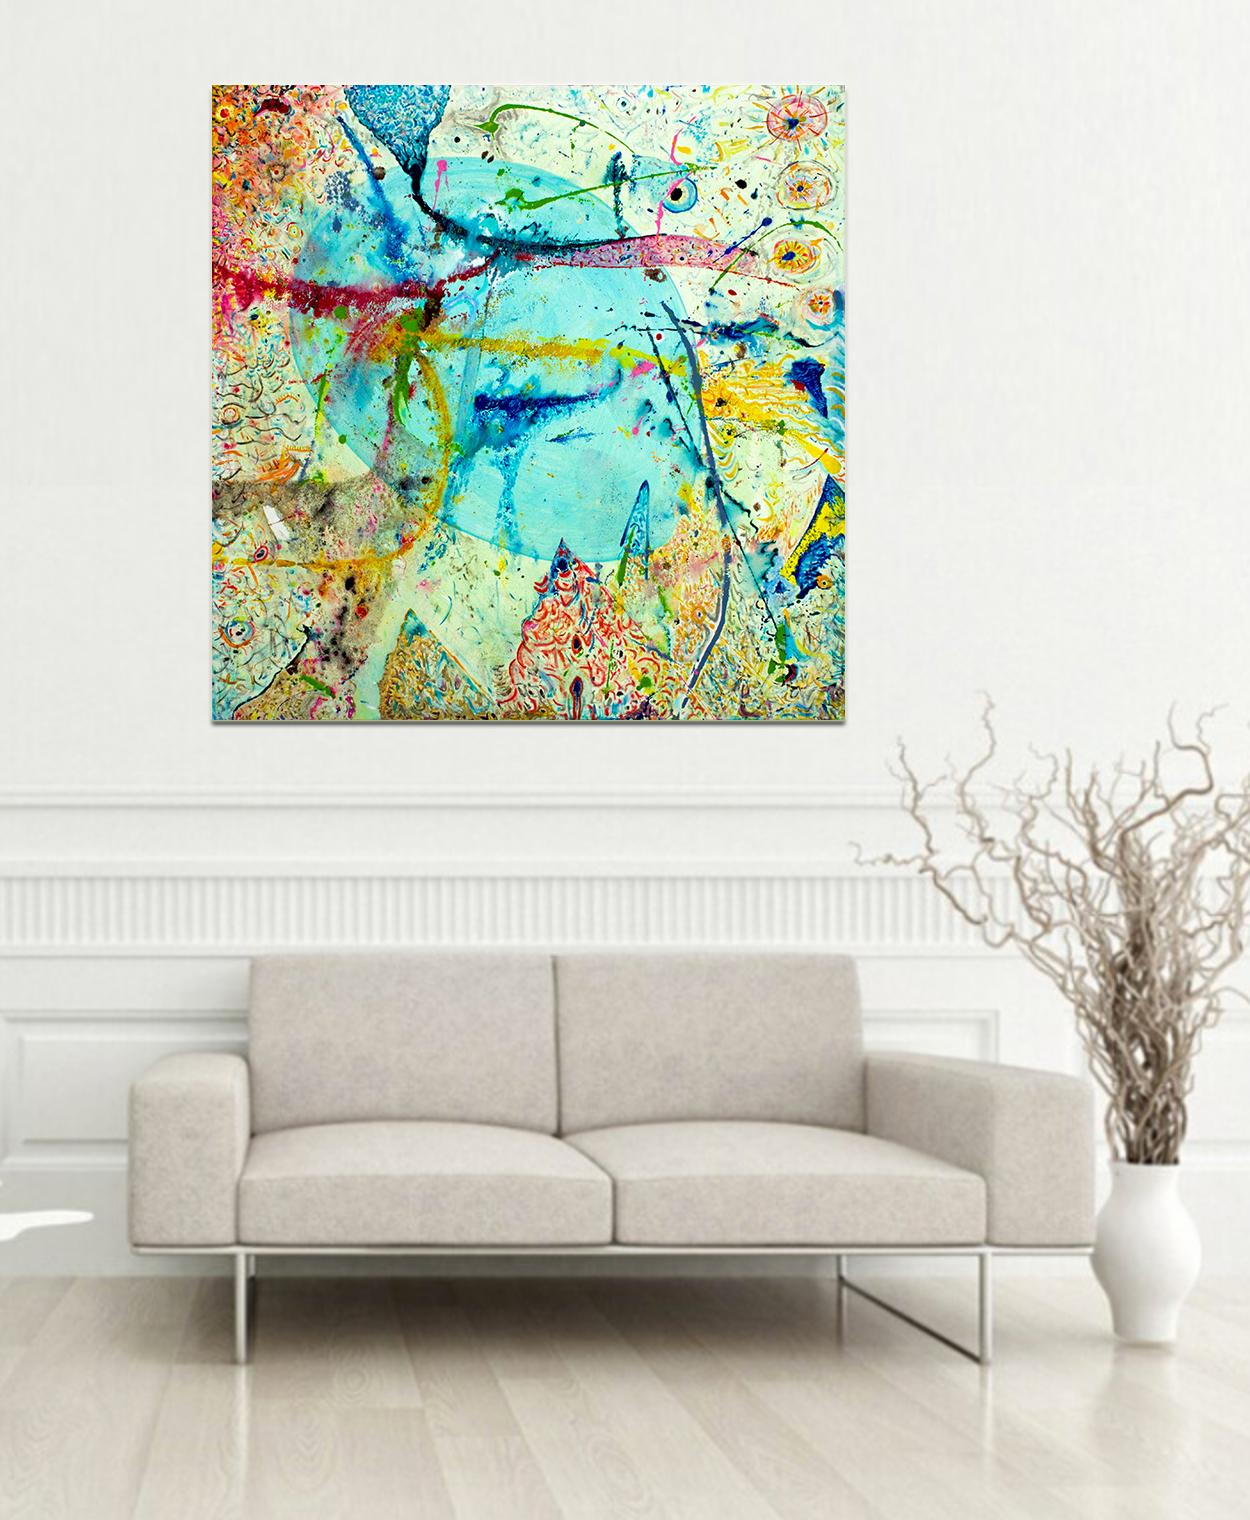 Korn Take 2 by Detlef Aderhold - Large Energetic Contemporary Abstract Painting For Sale 2